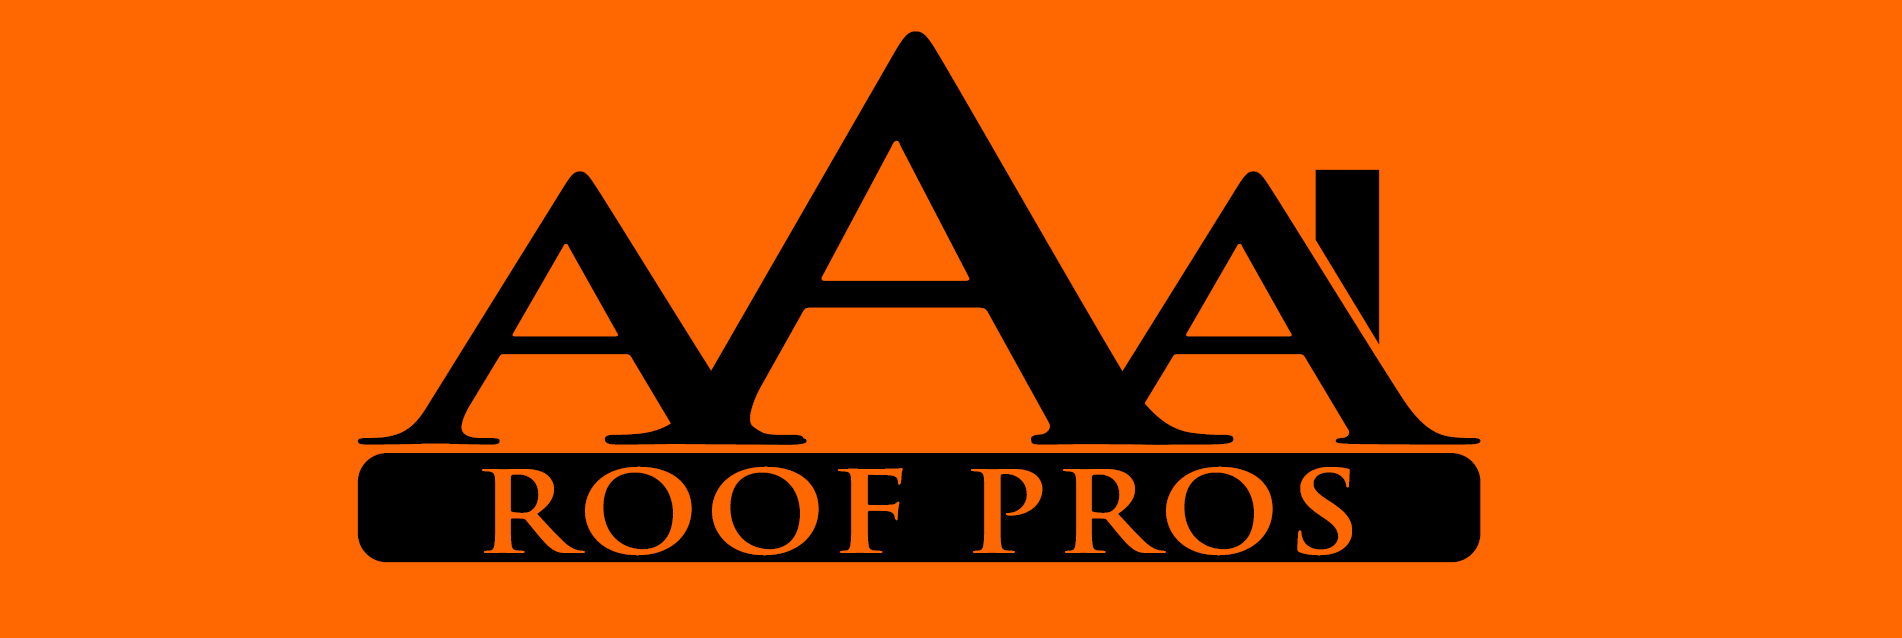 RI Roofing Company - AAA Roof Pros